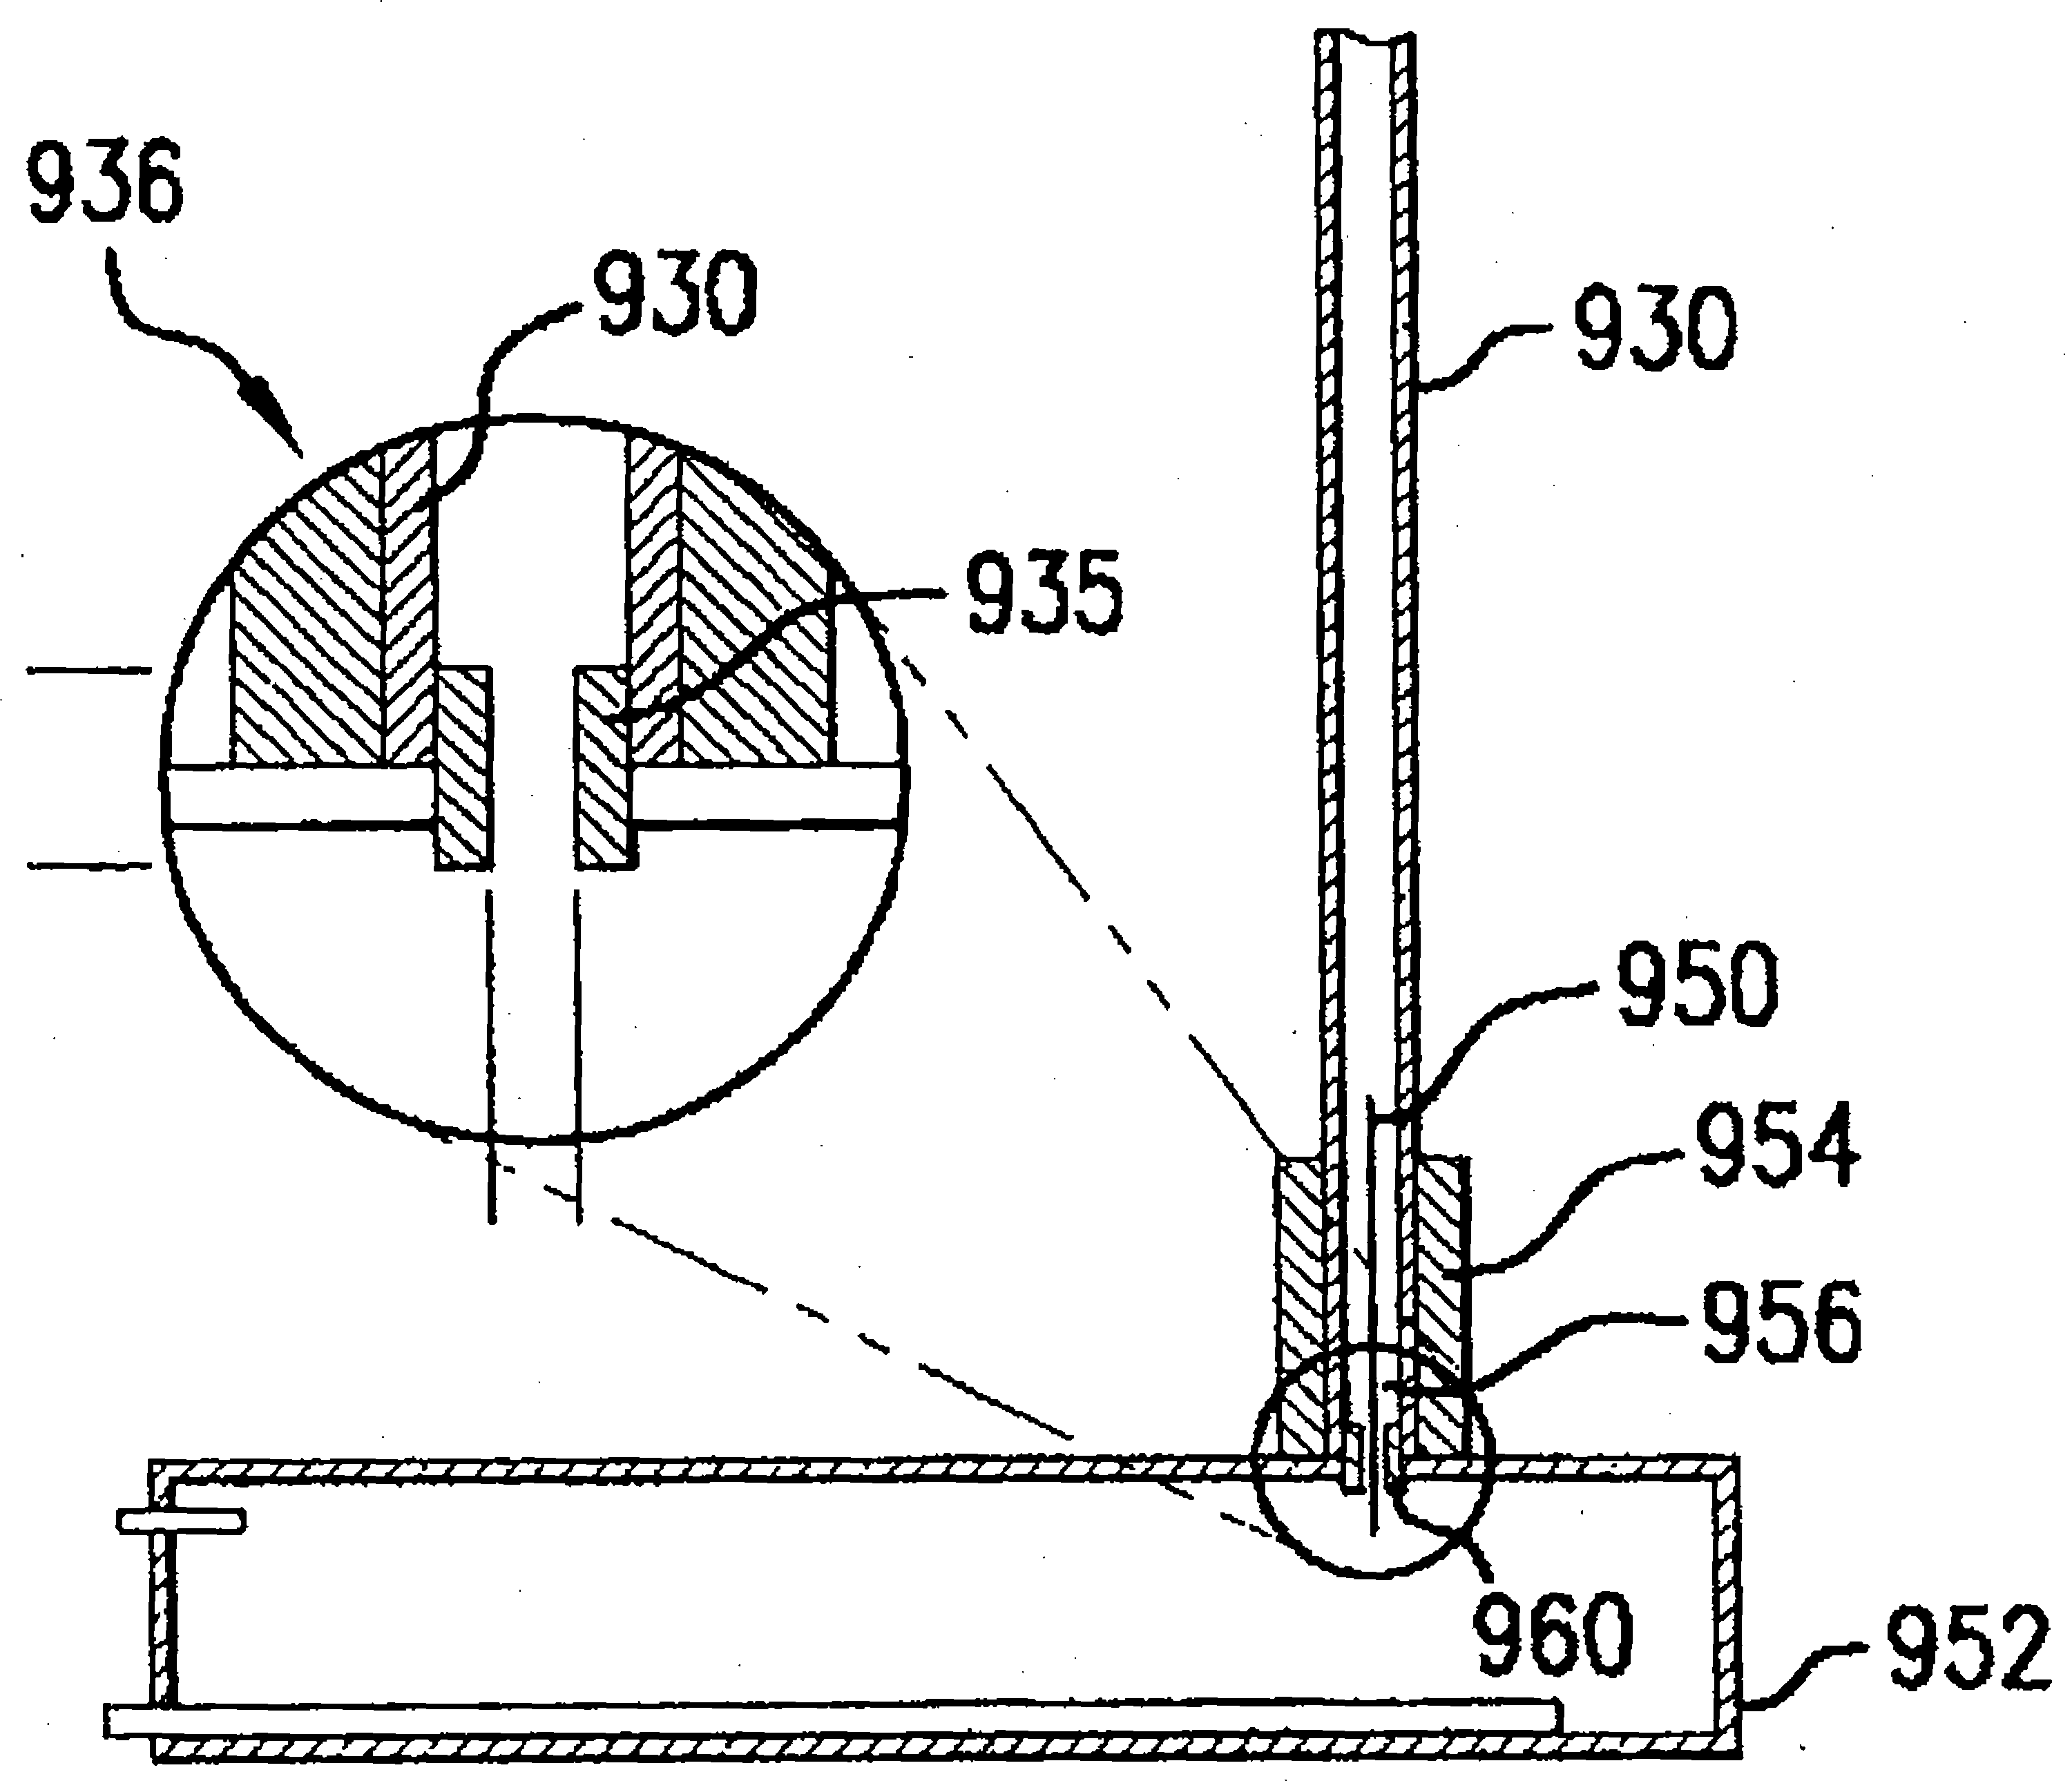 Apparatus for dissolving frozen polarized sample and applications